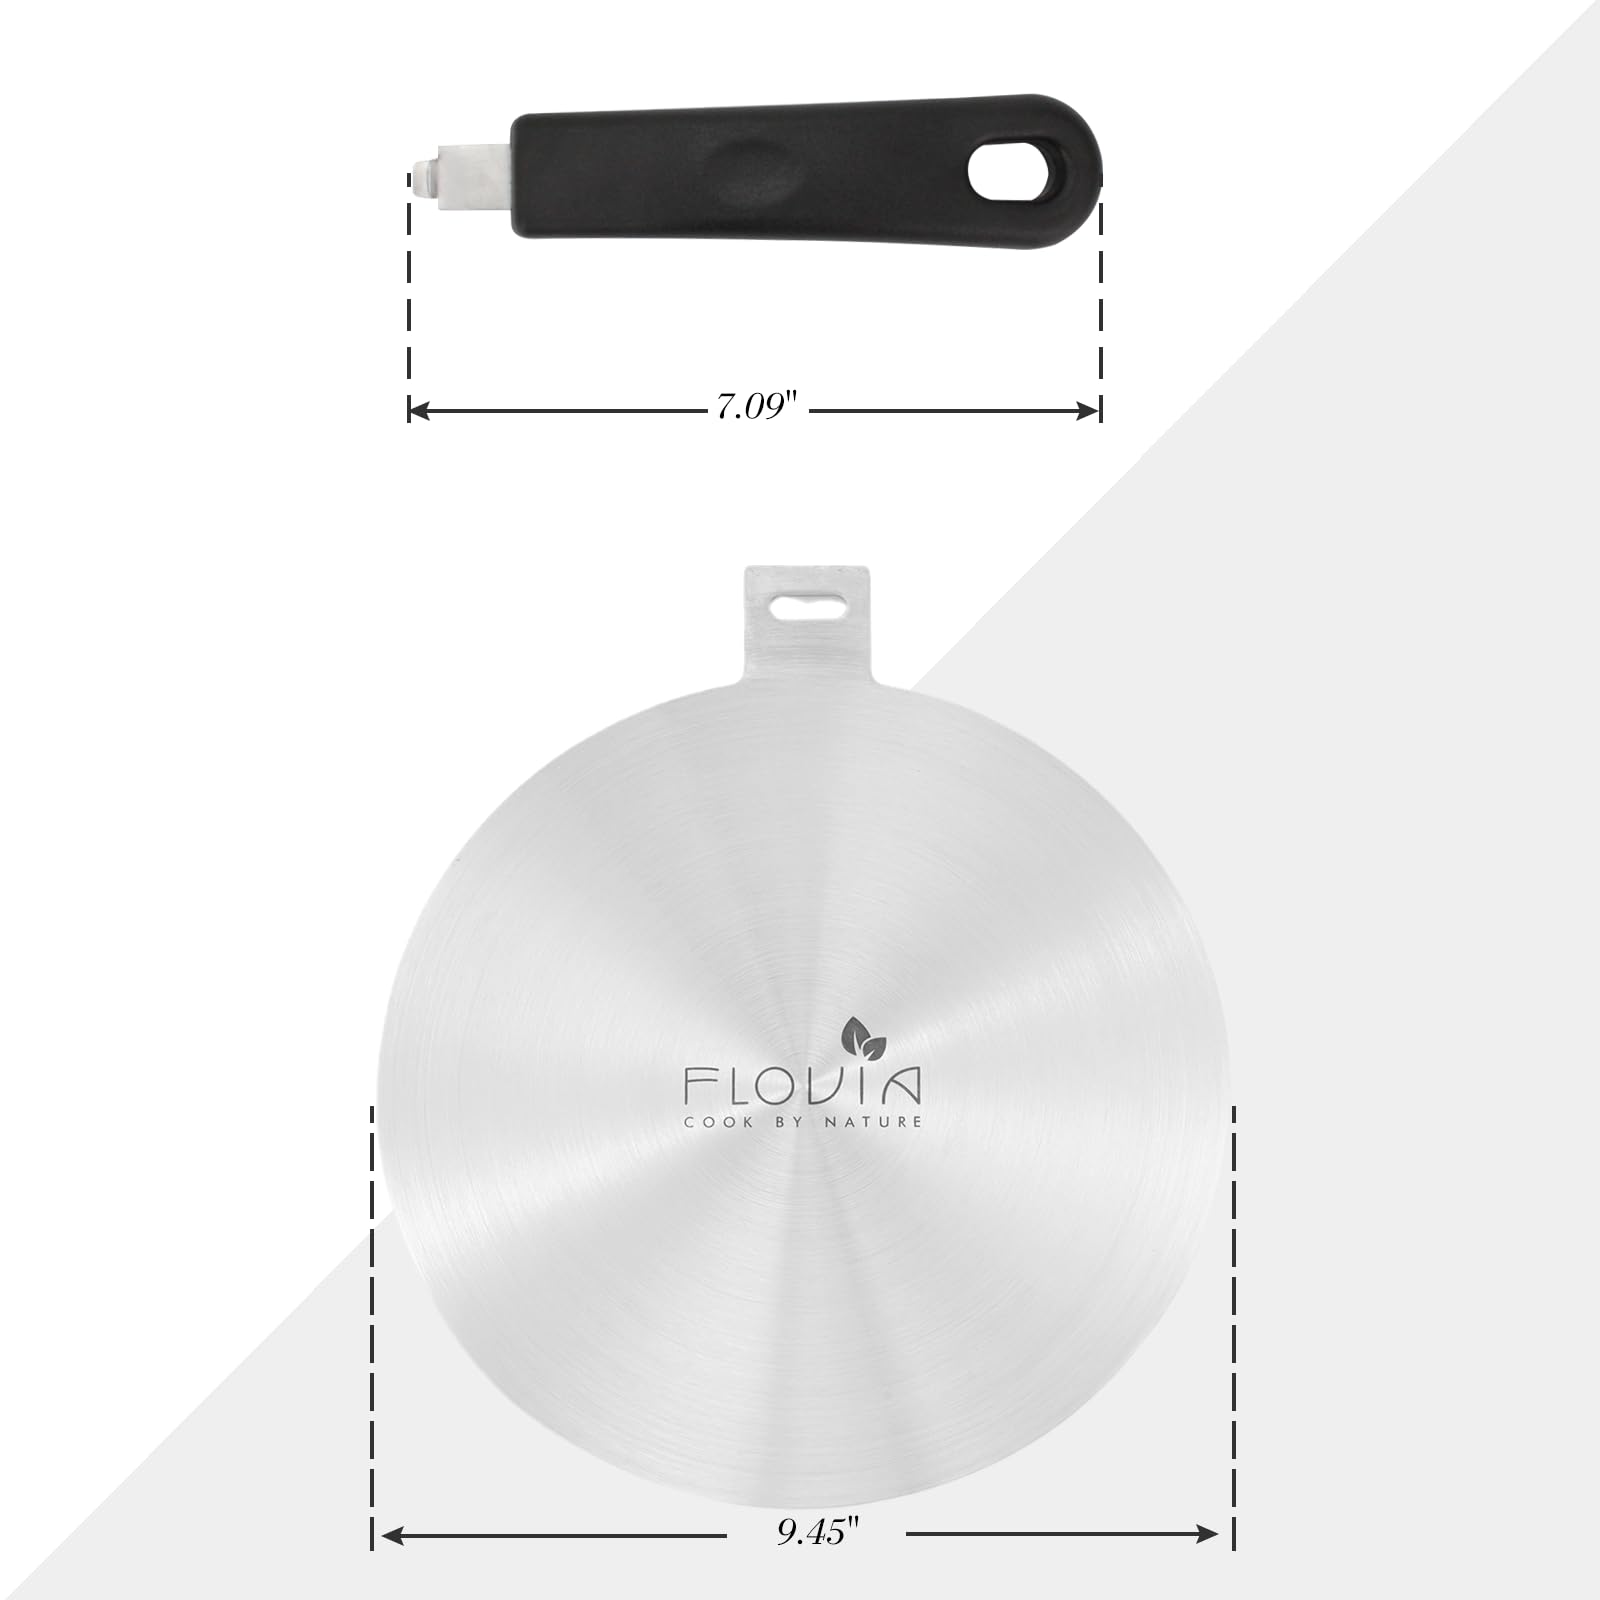 9.45inch Stainless Steel Induction Cooktop Adapter Plate, Heat Diffuser for Glass and Electric Cooktop, Detachable Handle